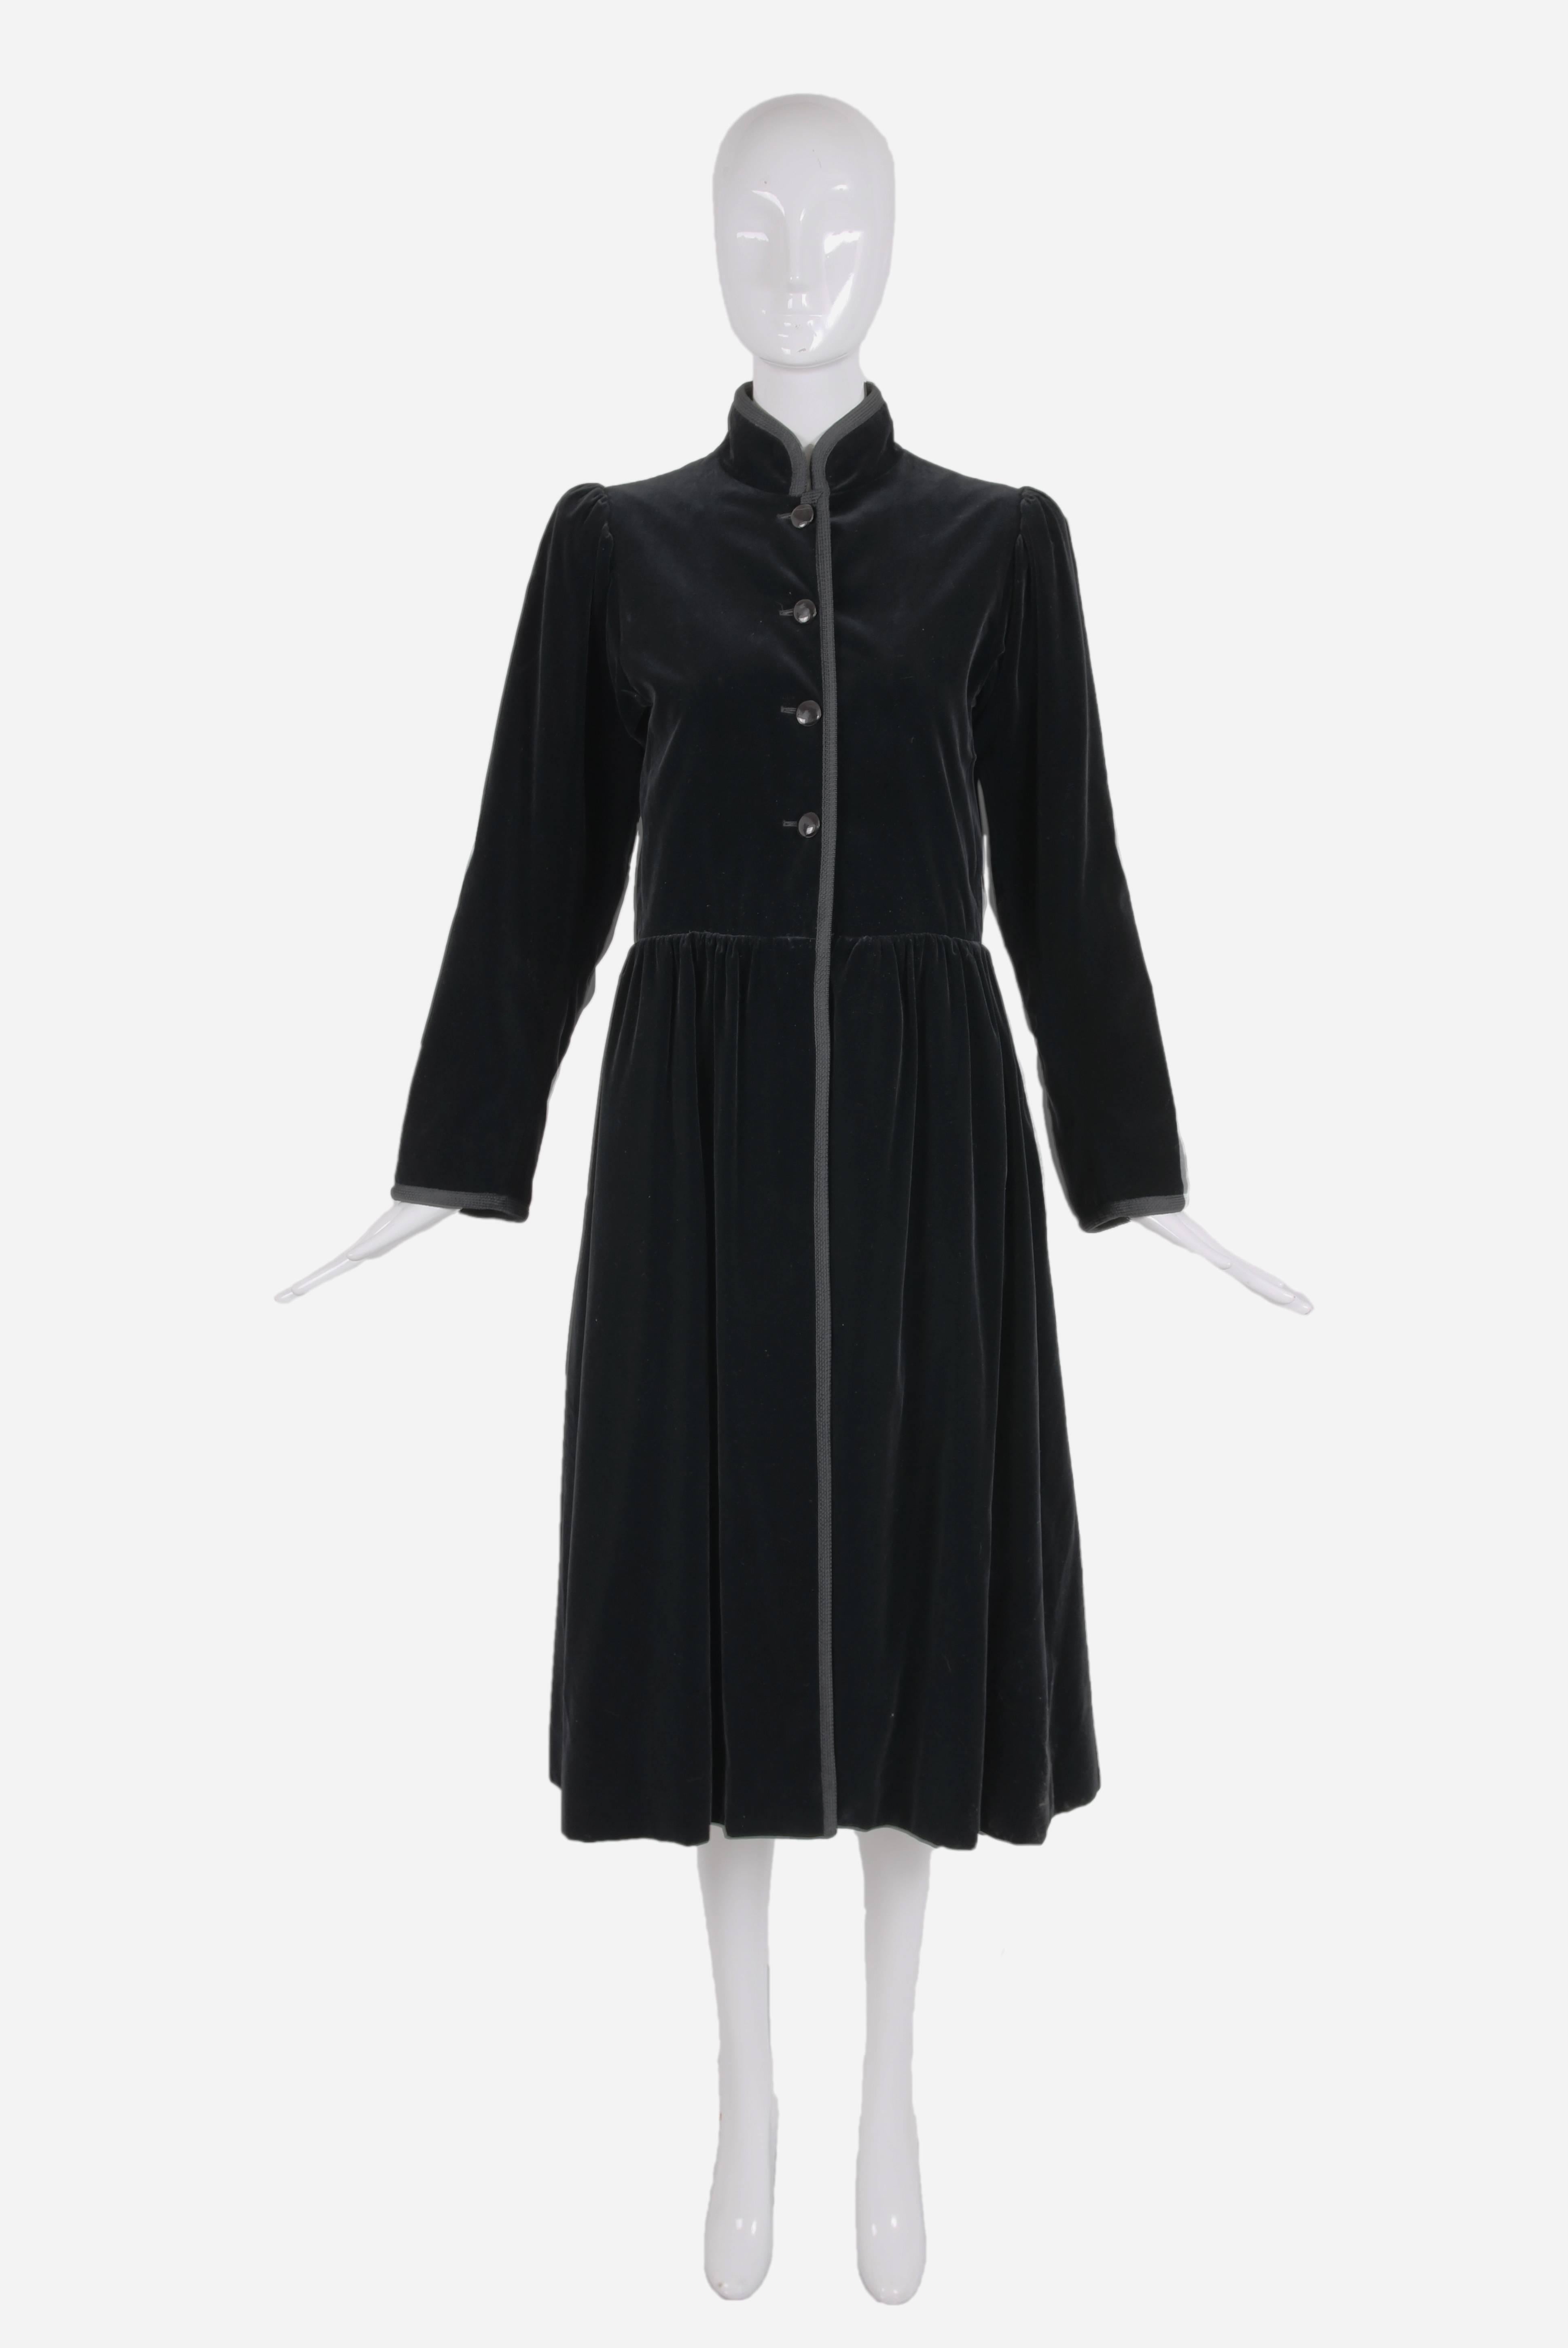 1976 Yves Saint Laurent Russian Collection black velvet coat with black cord trim, shiny black button closures at center front bodice, oversized puffed sleeves and with a slightly full/gathered 